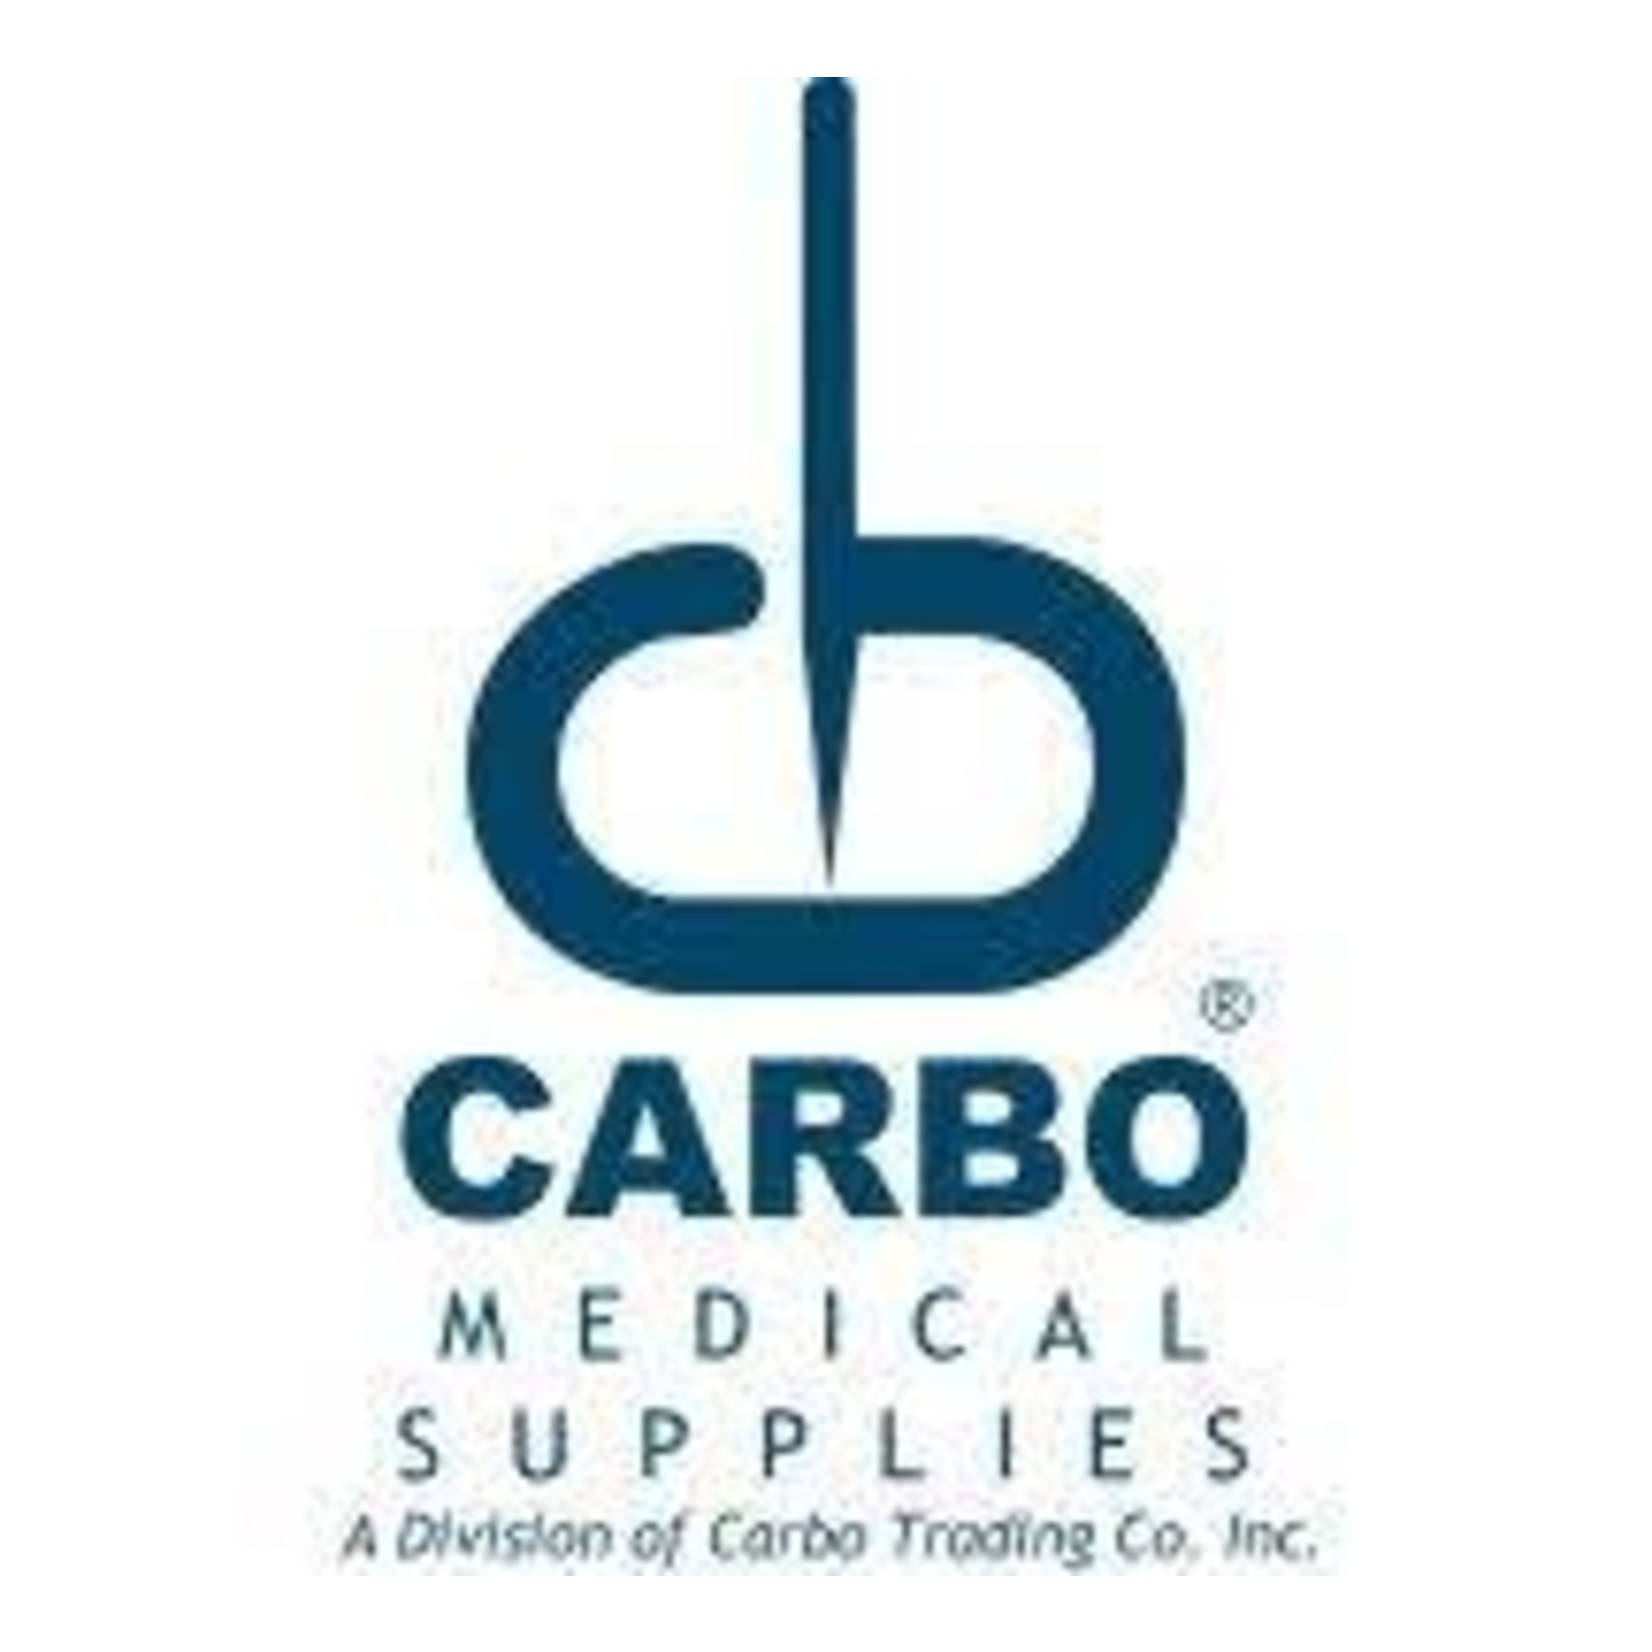 CARBO CARBO ACUPUNCTURE NEEDLE .22 x 25mm 100 PACK